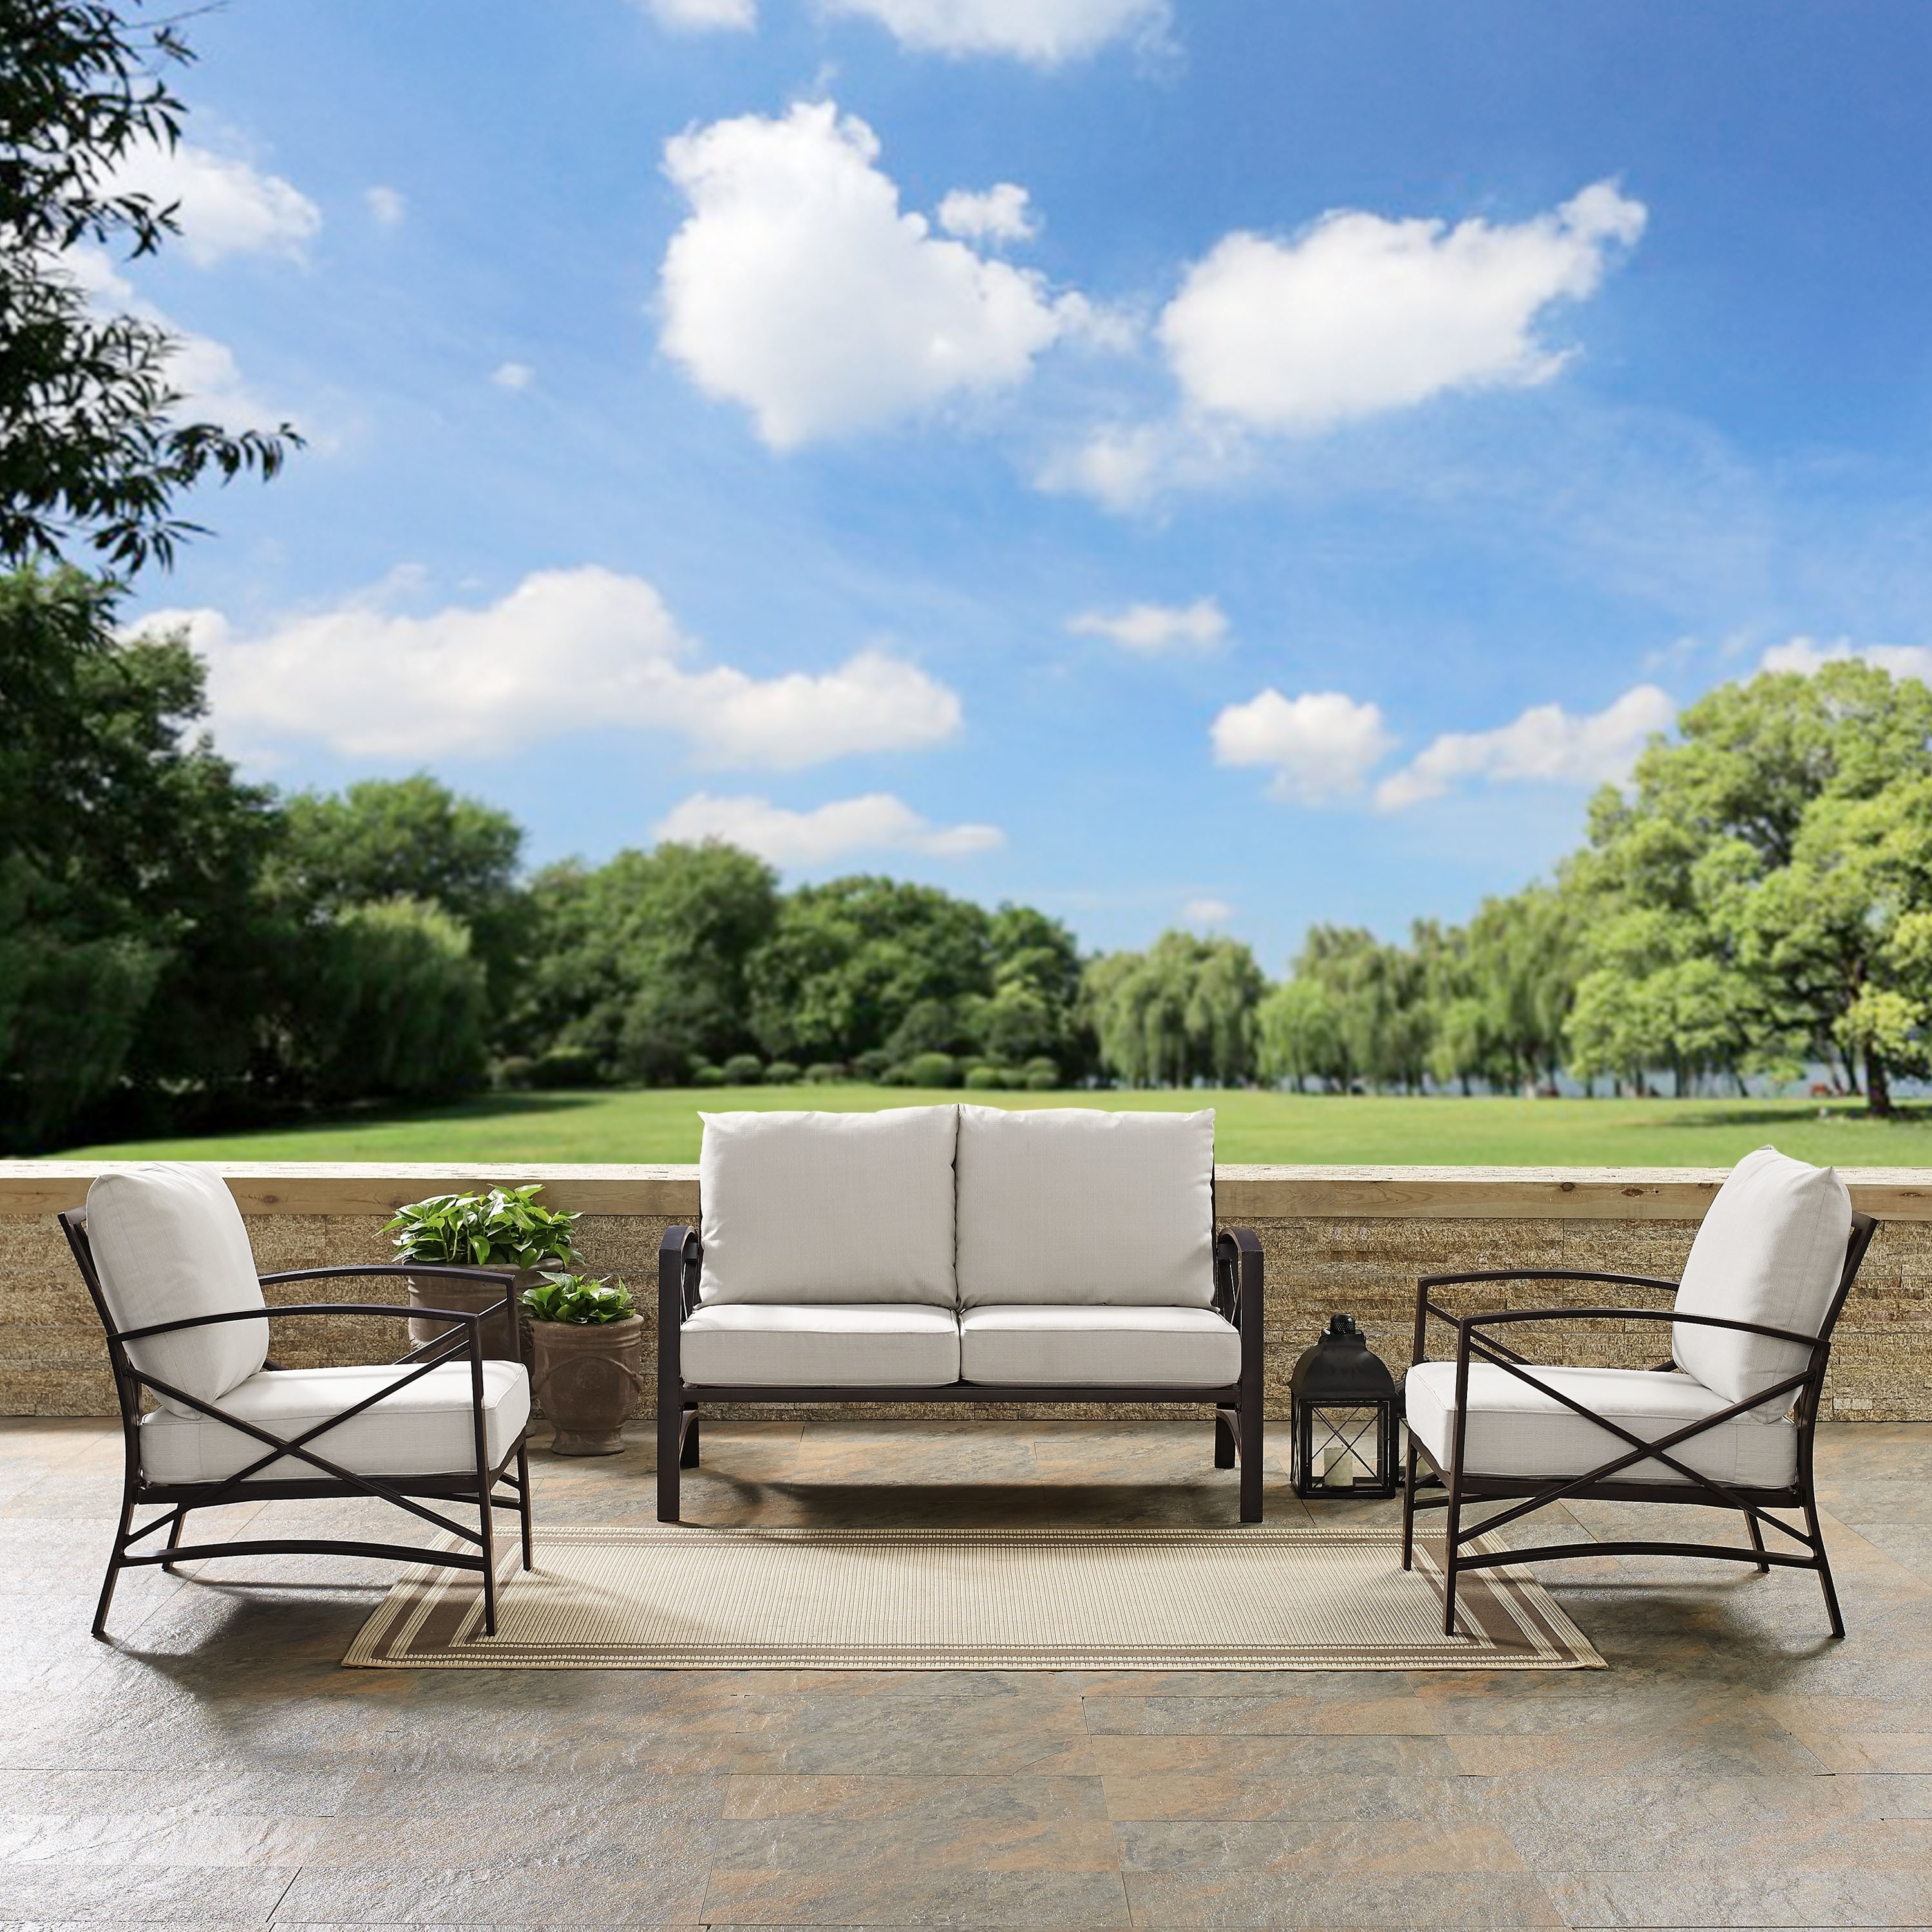 Kaplan 3 Pc Outdoor Seating Set With Oatmeal Cushion - Loveseat  Two Outdoor Chairs - 137w X 35.5h X 65d